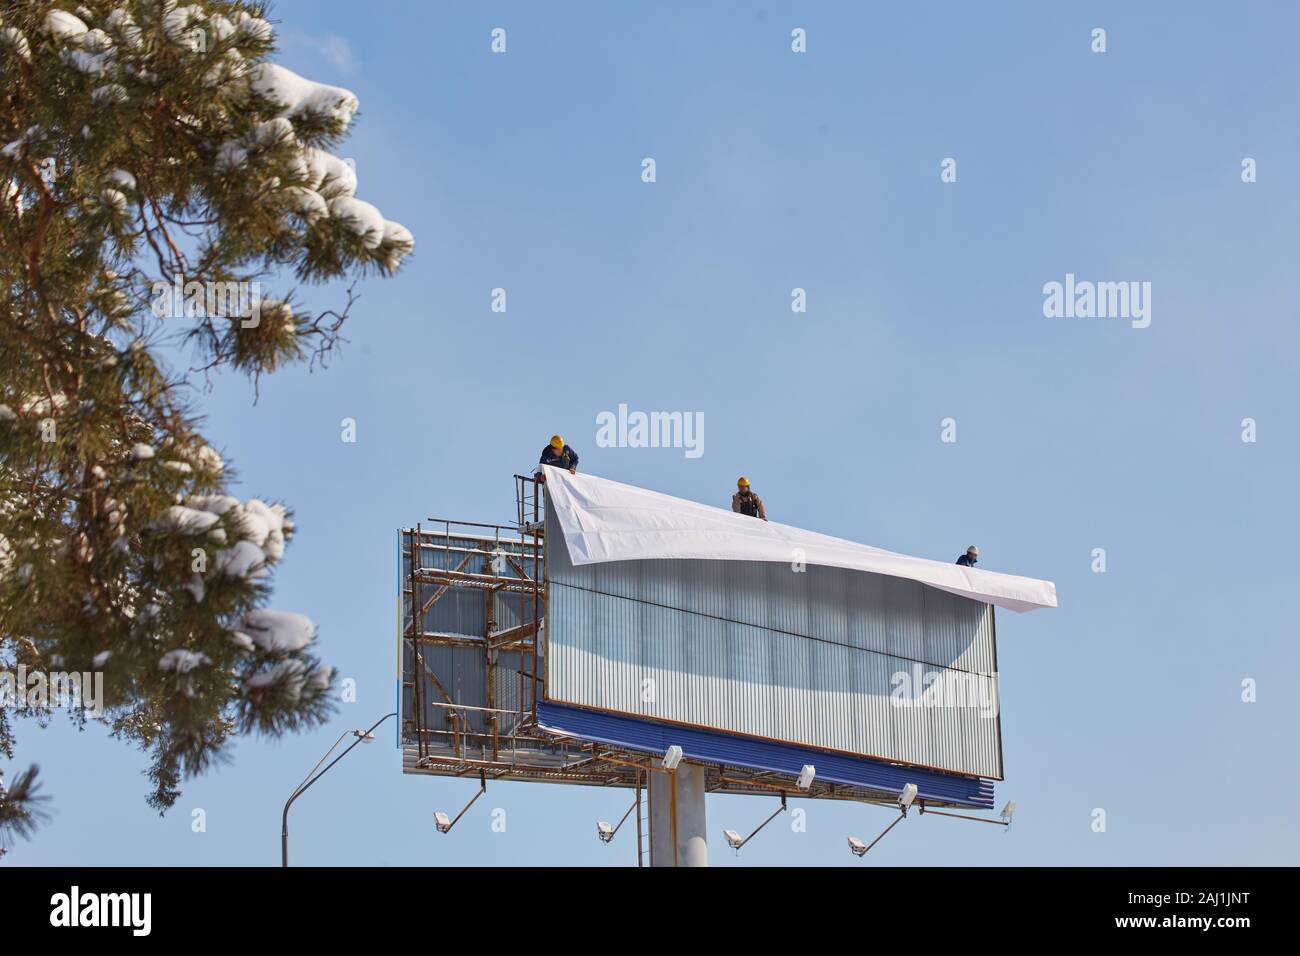 Worker prepares billboard to installing new advertisement. Industrial climber working on a ladder - placing an advertising banner. Stock Photo